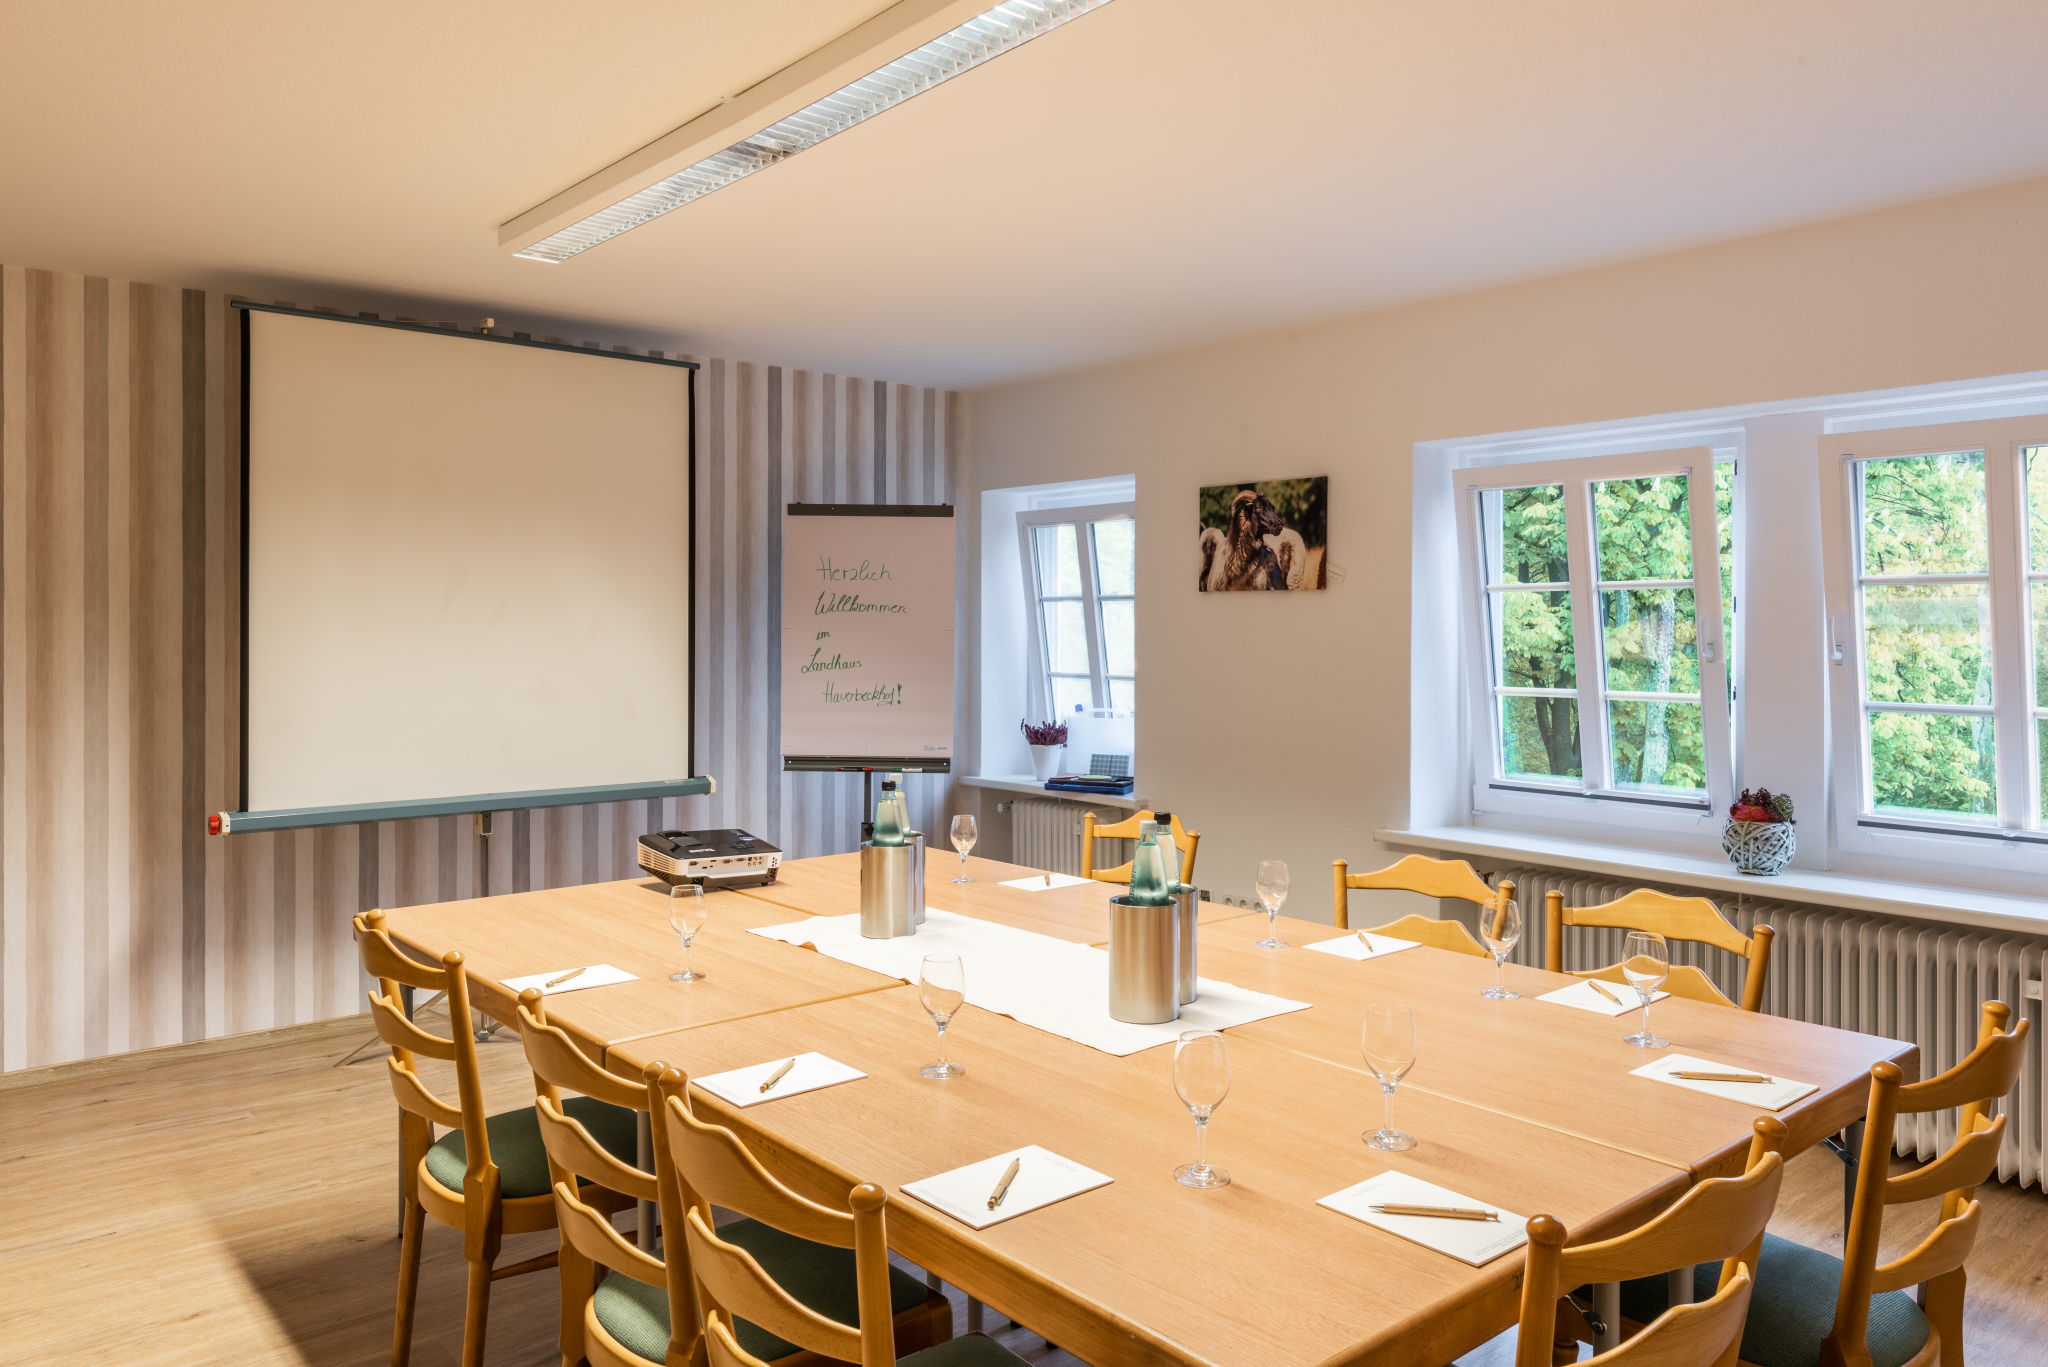 The meeting room on the upper floor is suitable for a maximum of 10 people | Photo: Markus Tiemann